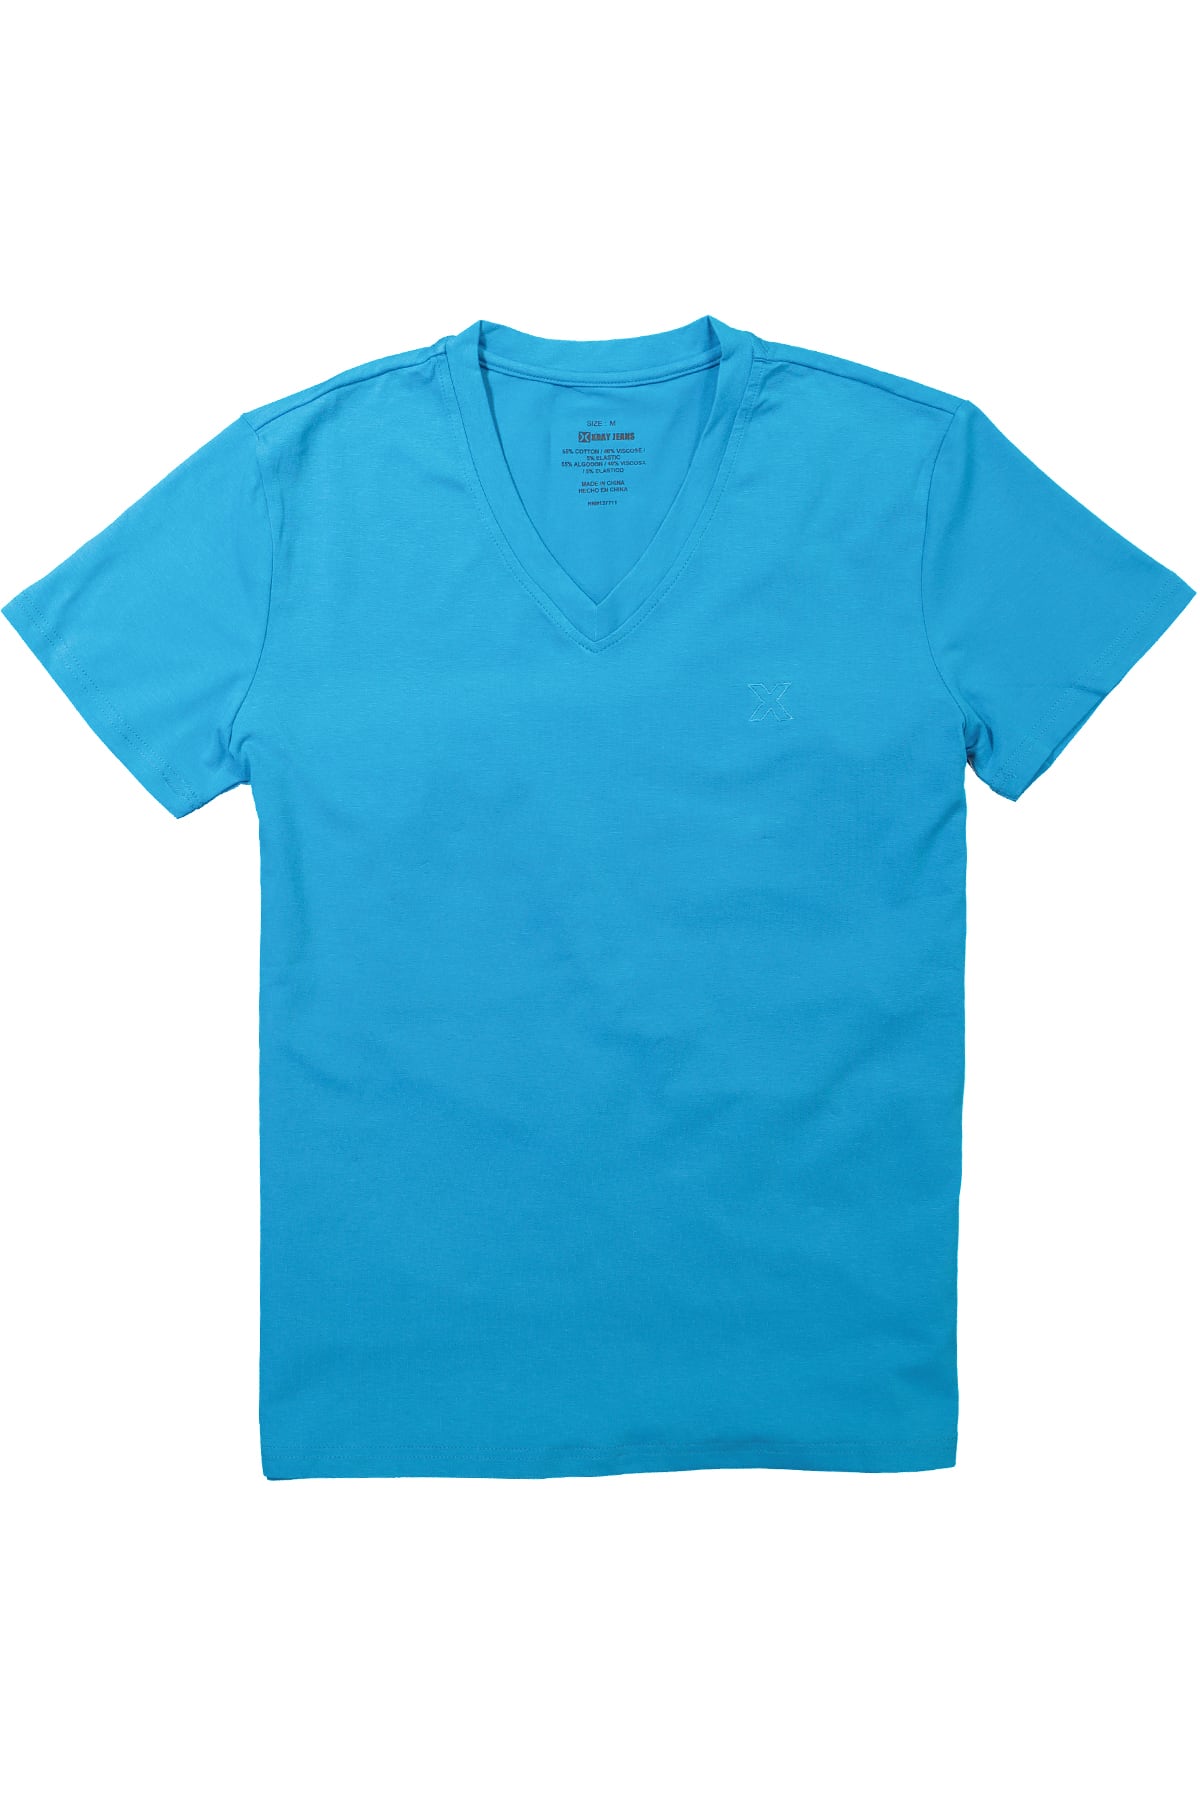 X-Ray Jeans Turquoise V-Neck Tee